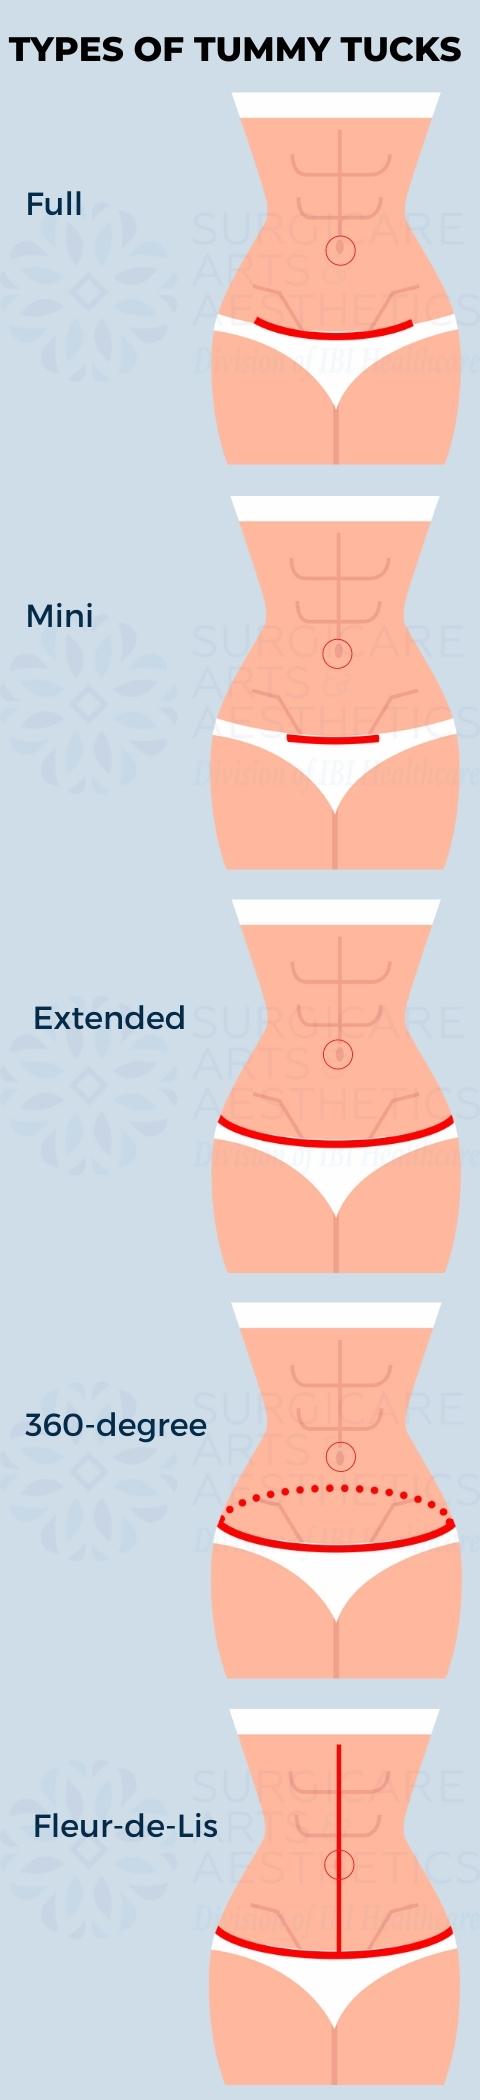 What is the Difference between Belt Lipectomy & Tummy Tuck? 